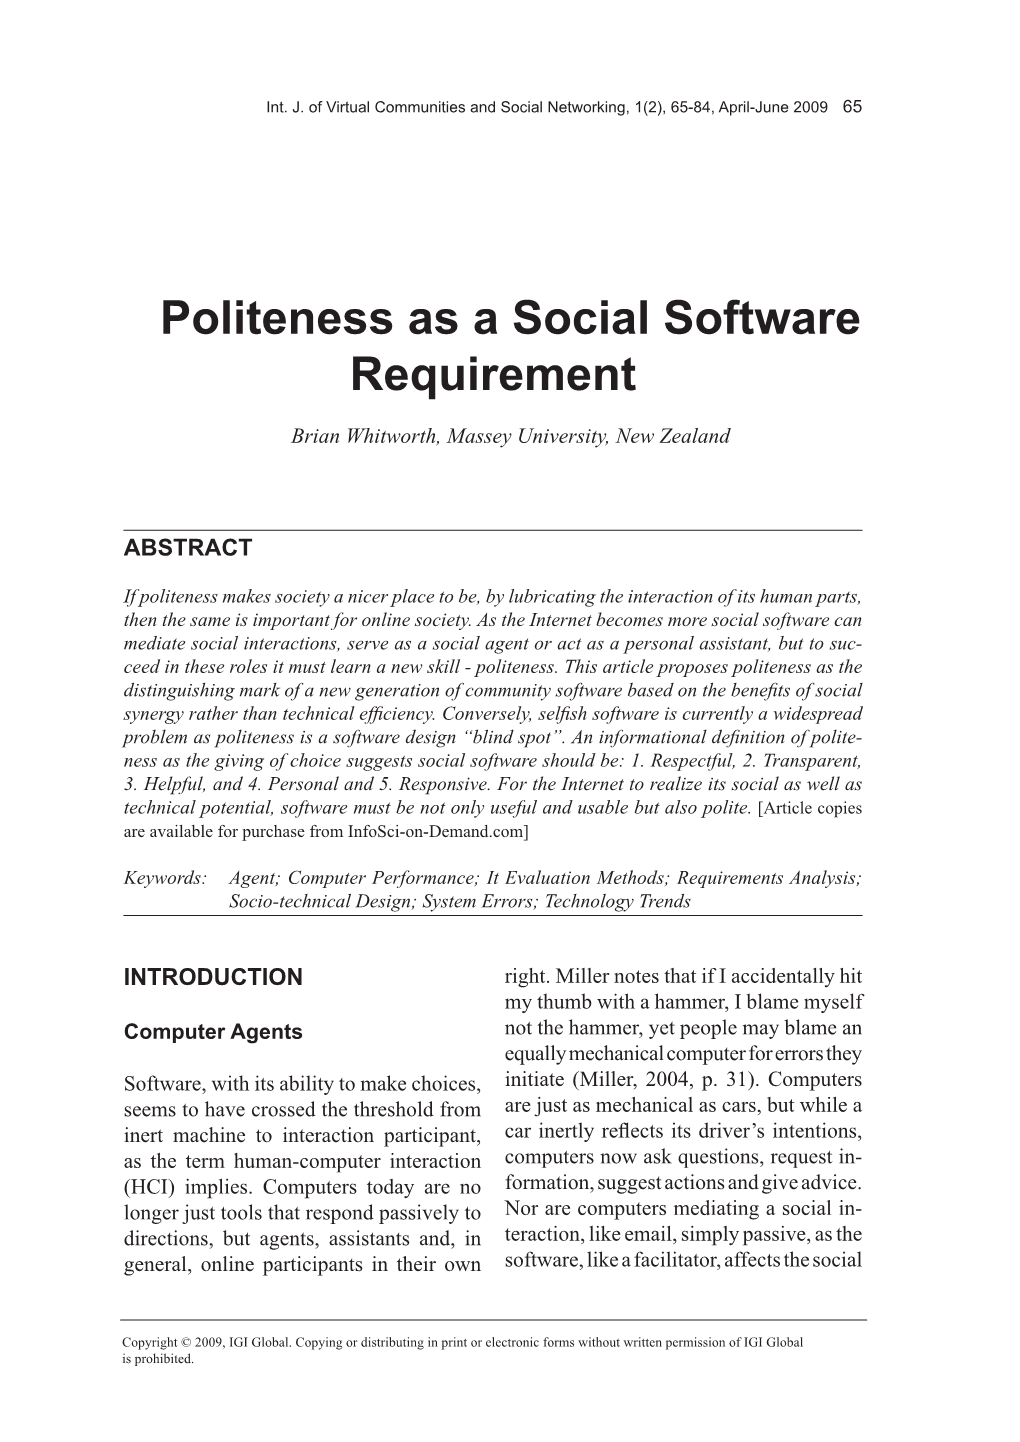 Politeness As a Social Software Requirement Brian Whitworth, Massey University, New Zealand